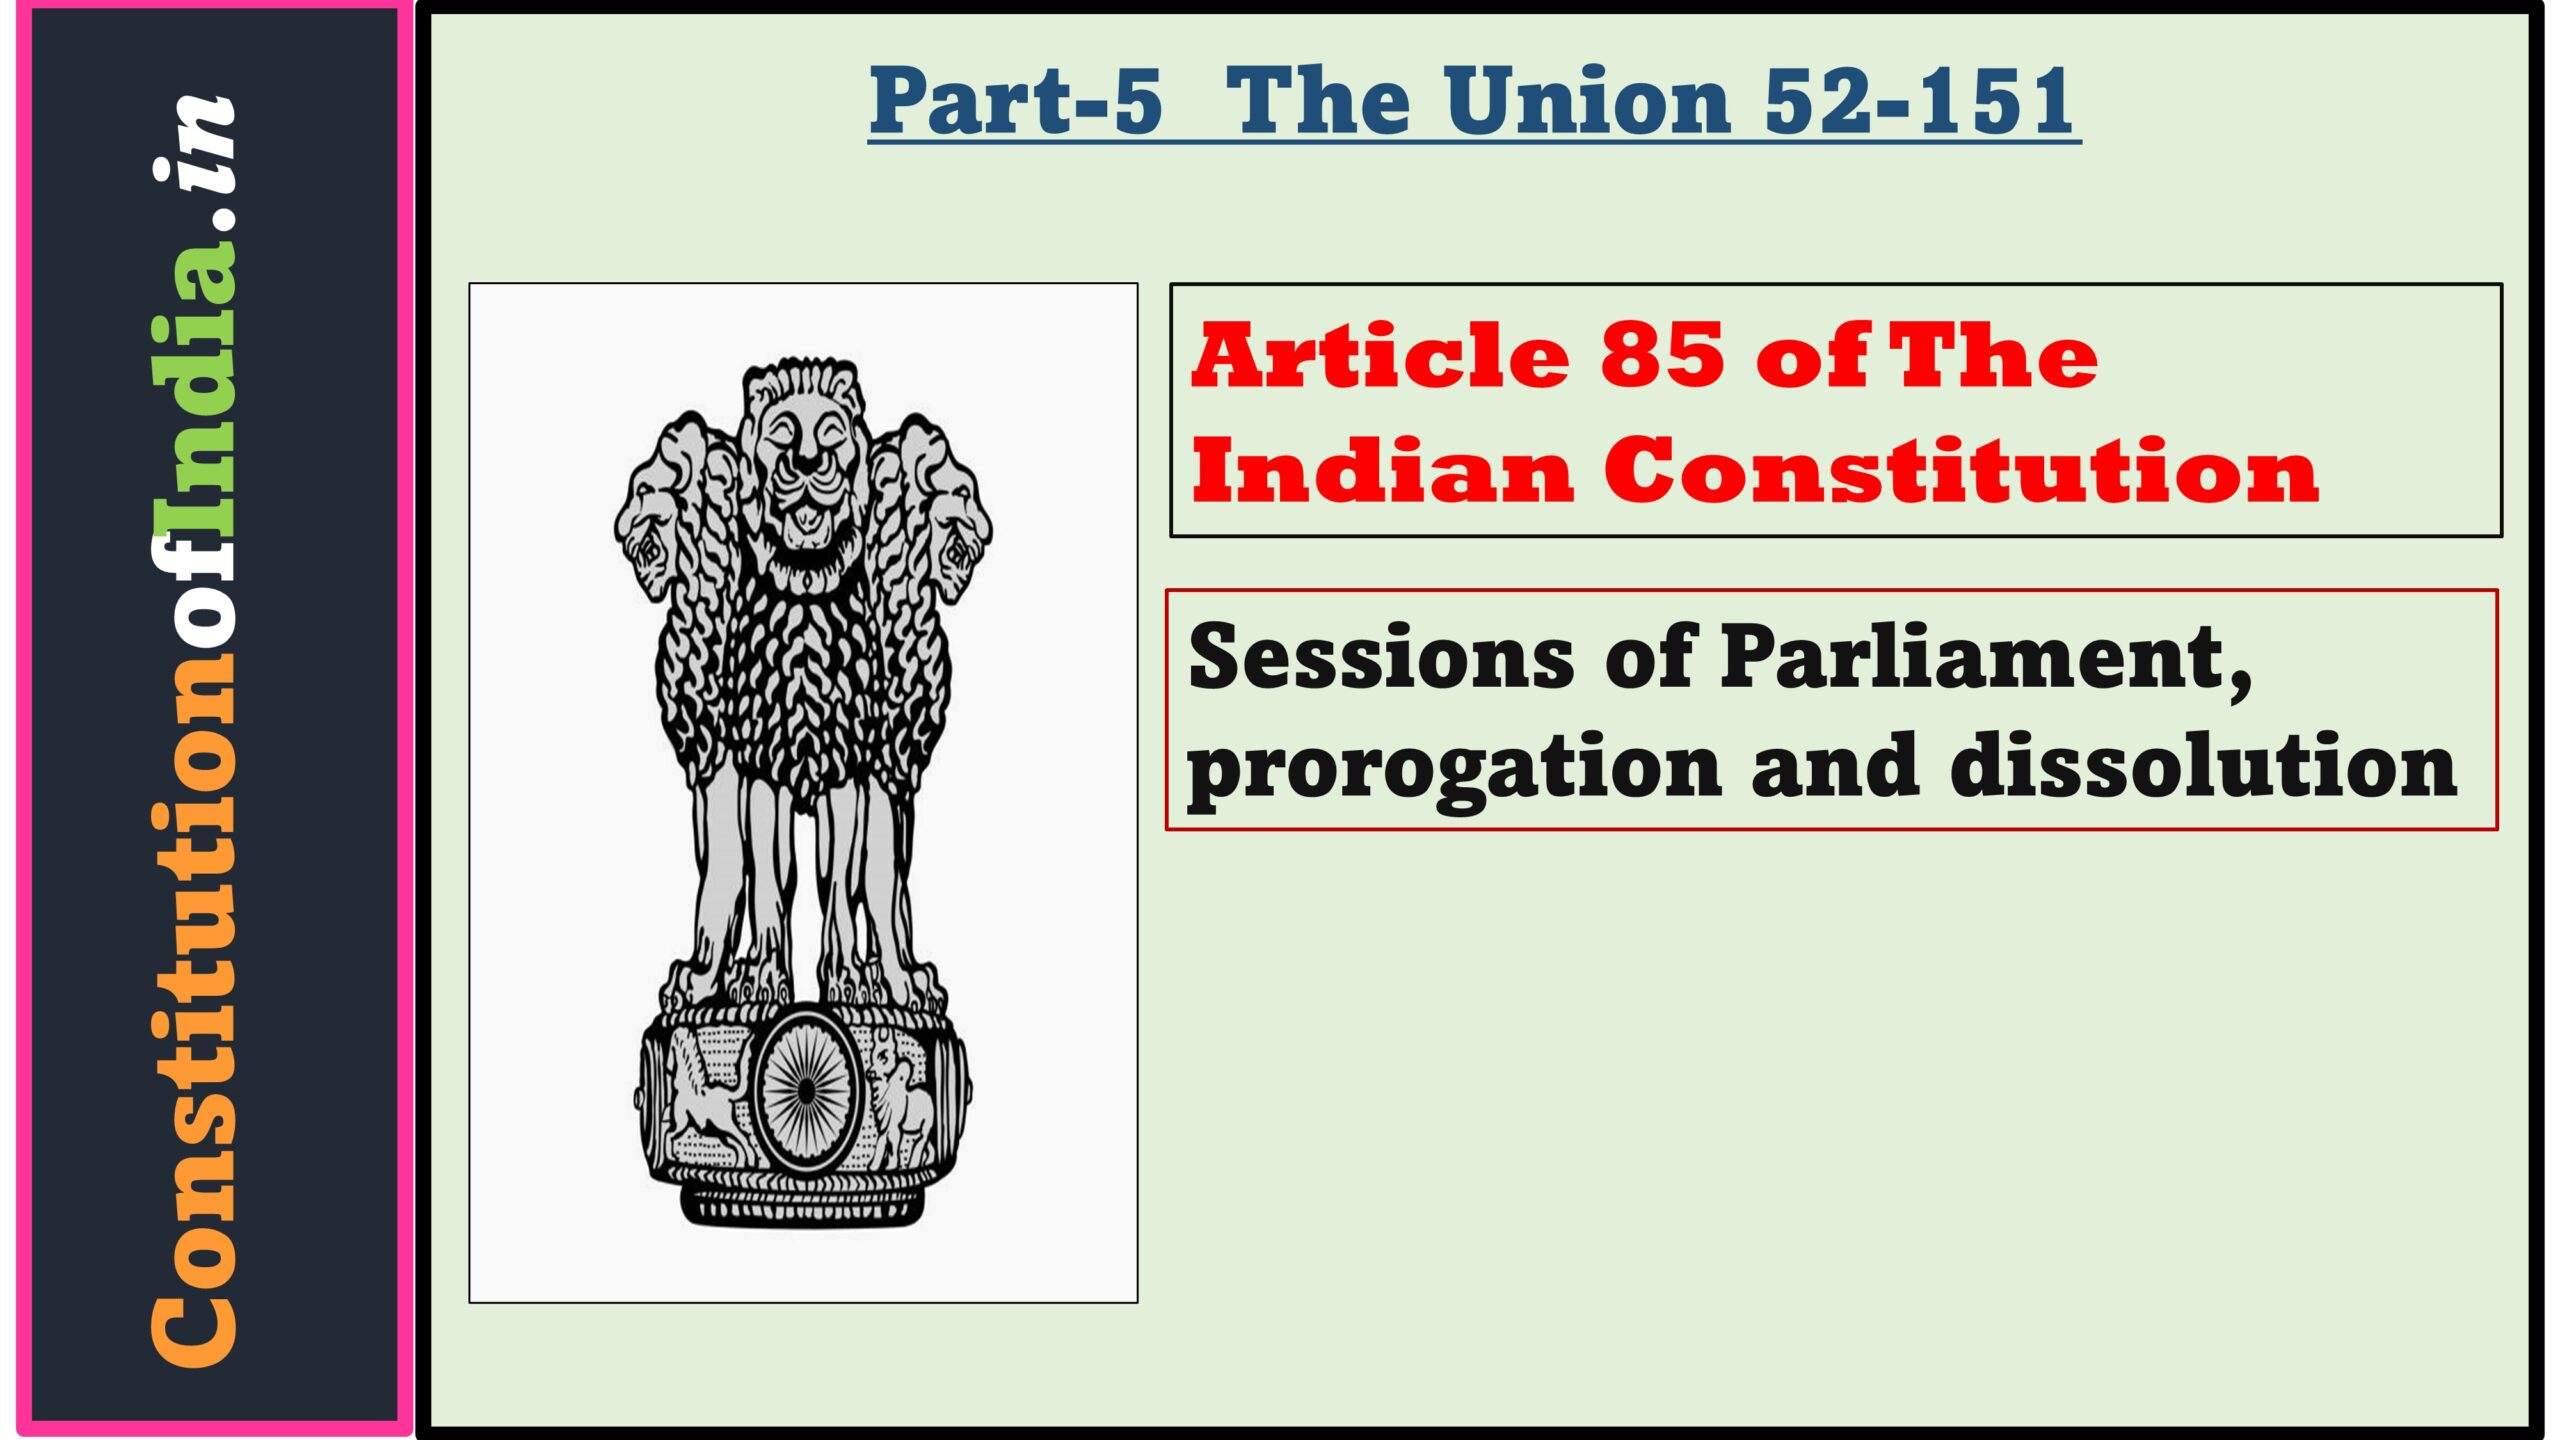 Article 85 of The Indian Constitution